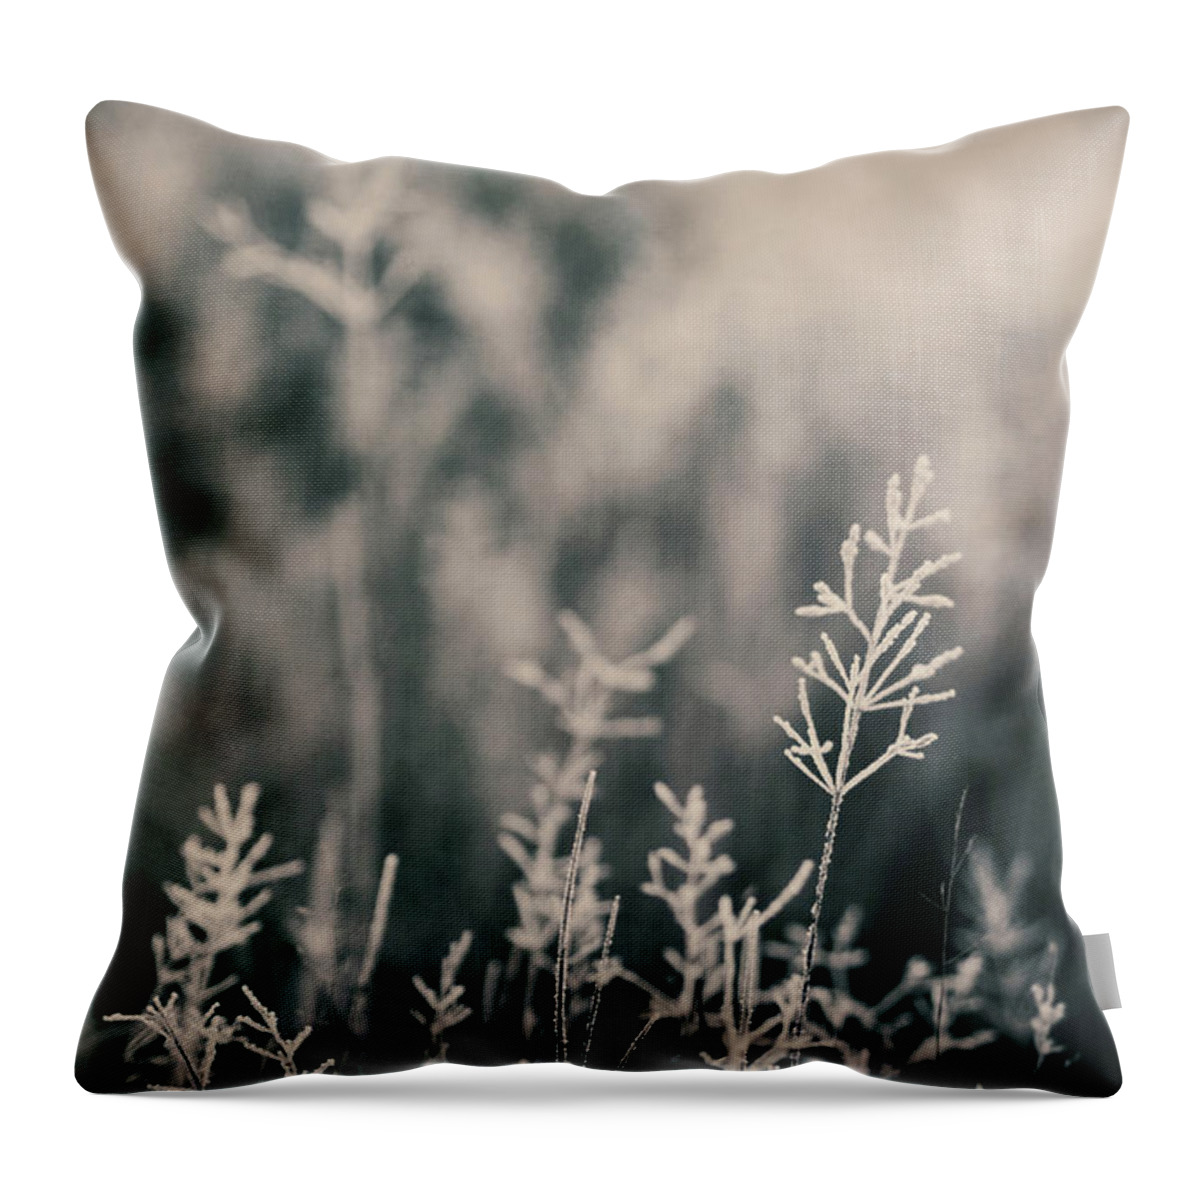 Tranquility Throw Pillow featuring the photograph Frost On Grasses, London by Kirstin Mckee